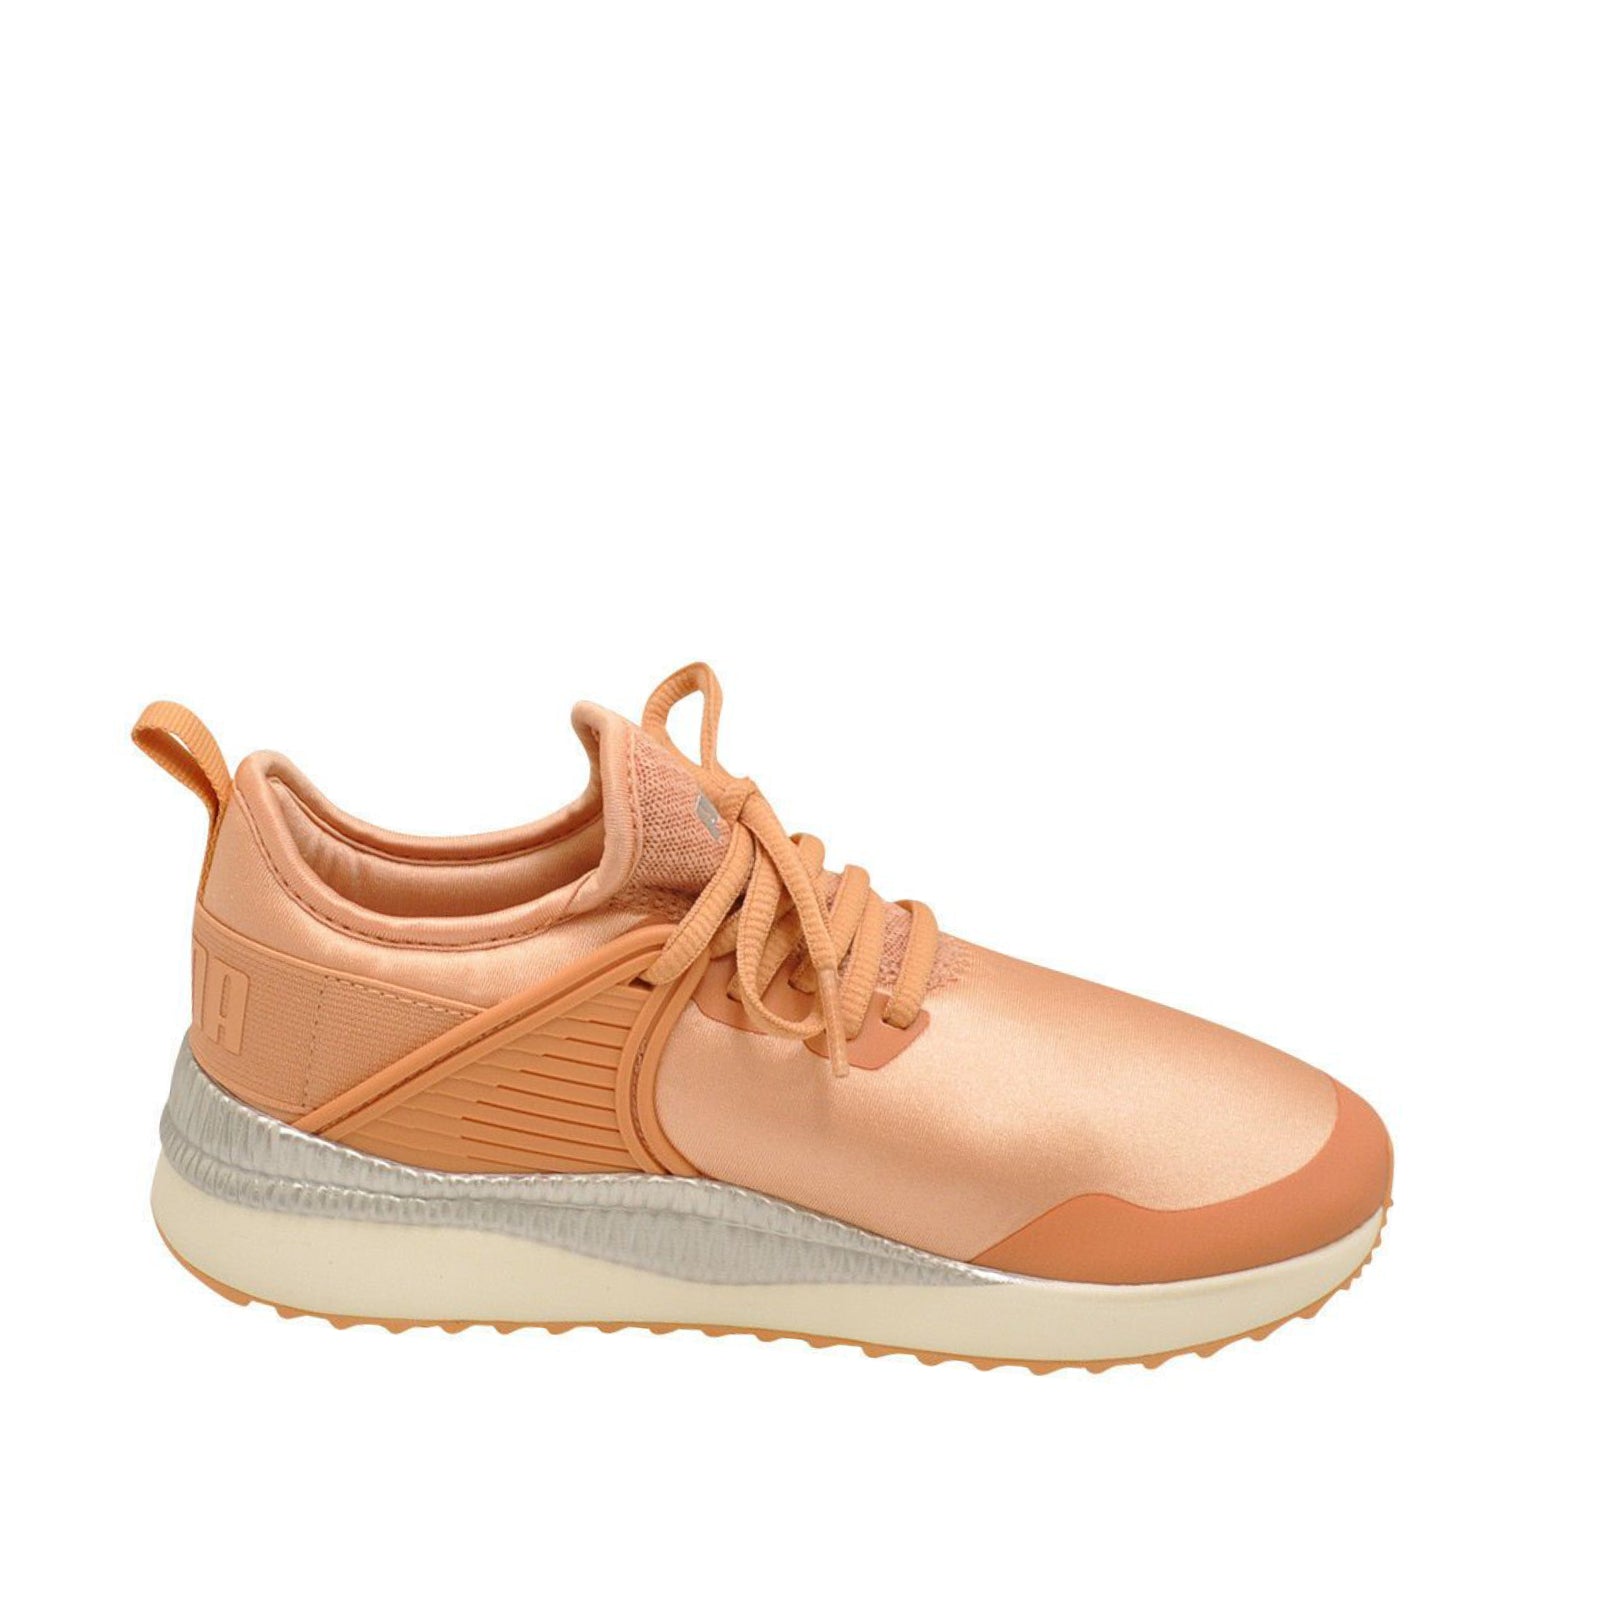 Puma Pacer Next 36766001 (Dusty Coral / White) Milano Shoes